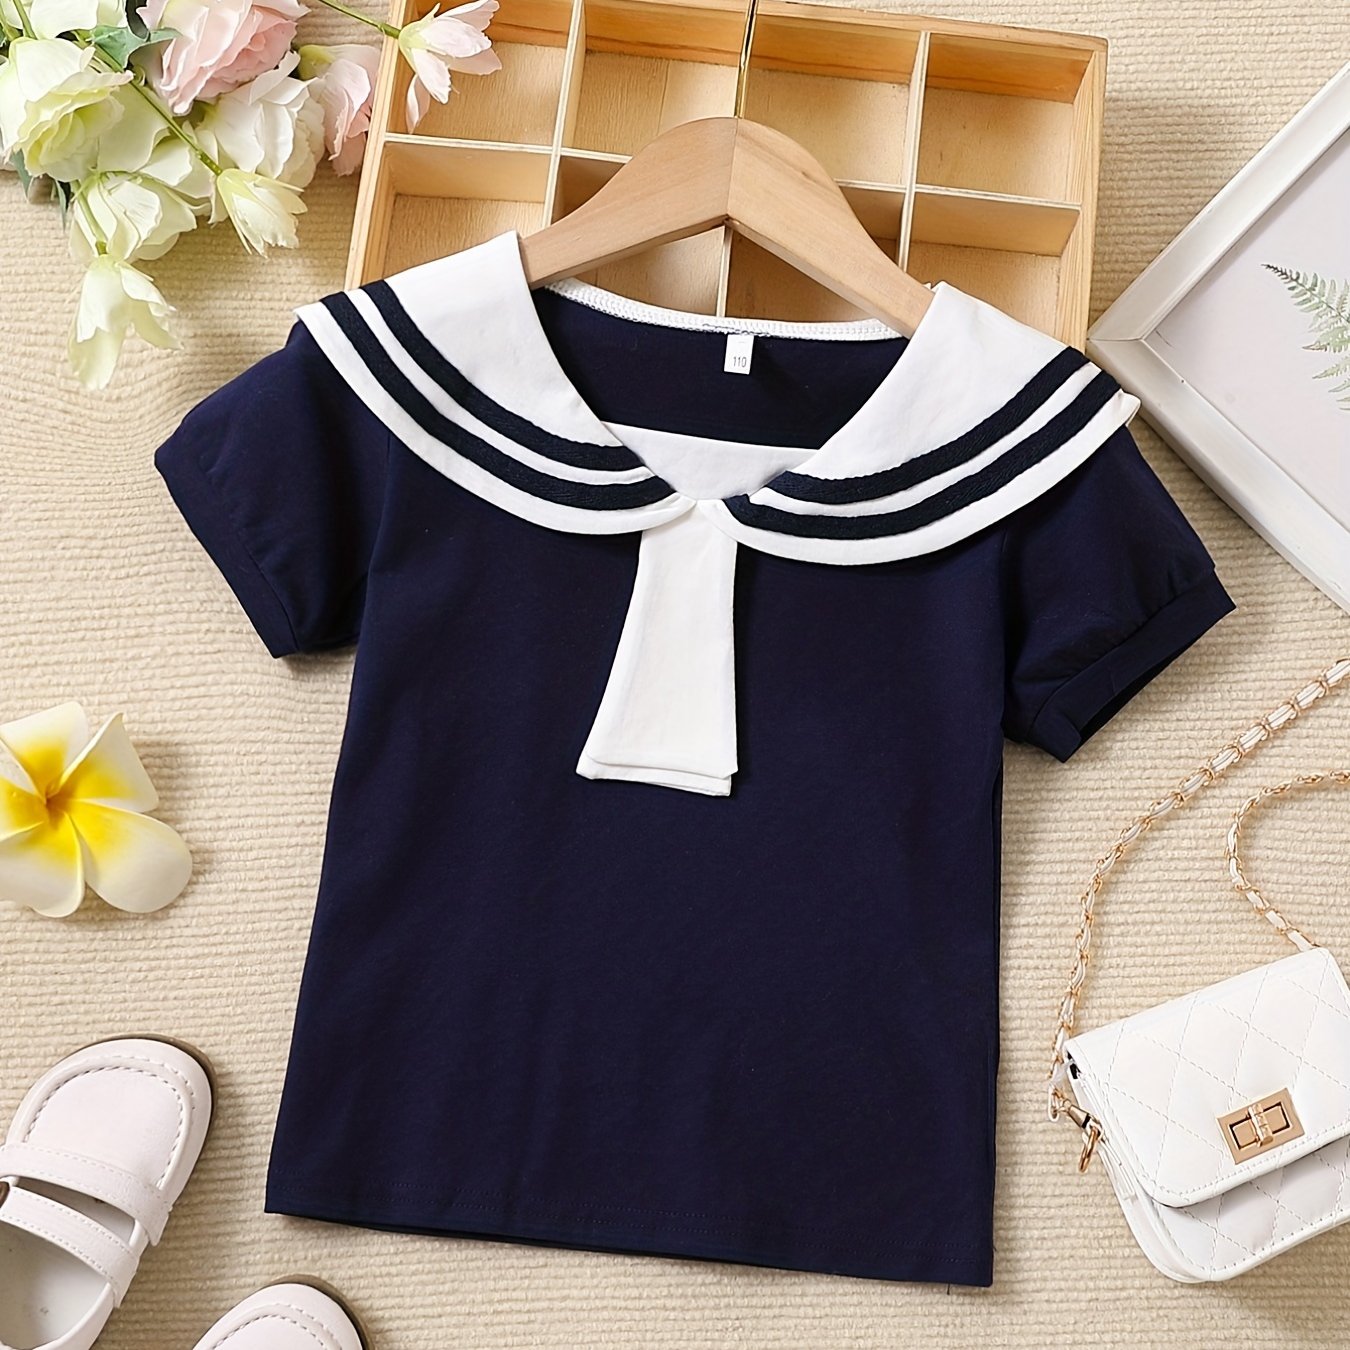 Girls Casual Trendy Cute Preppy Style Short Sleeve Top Sailor